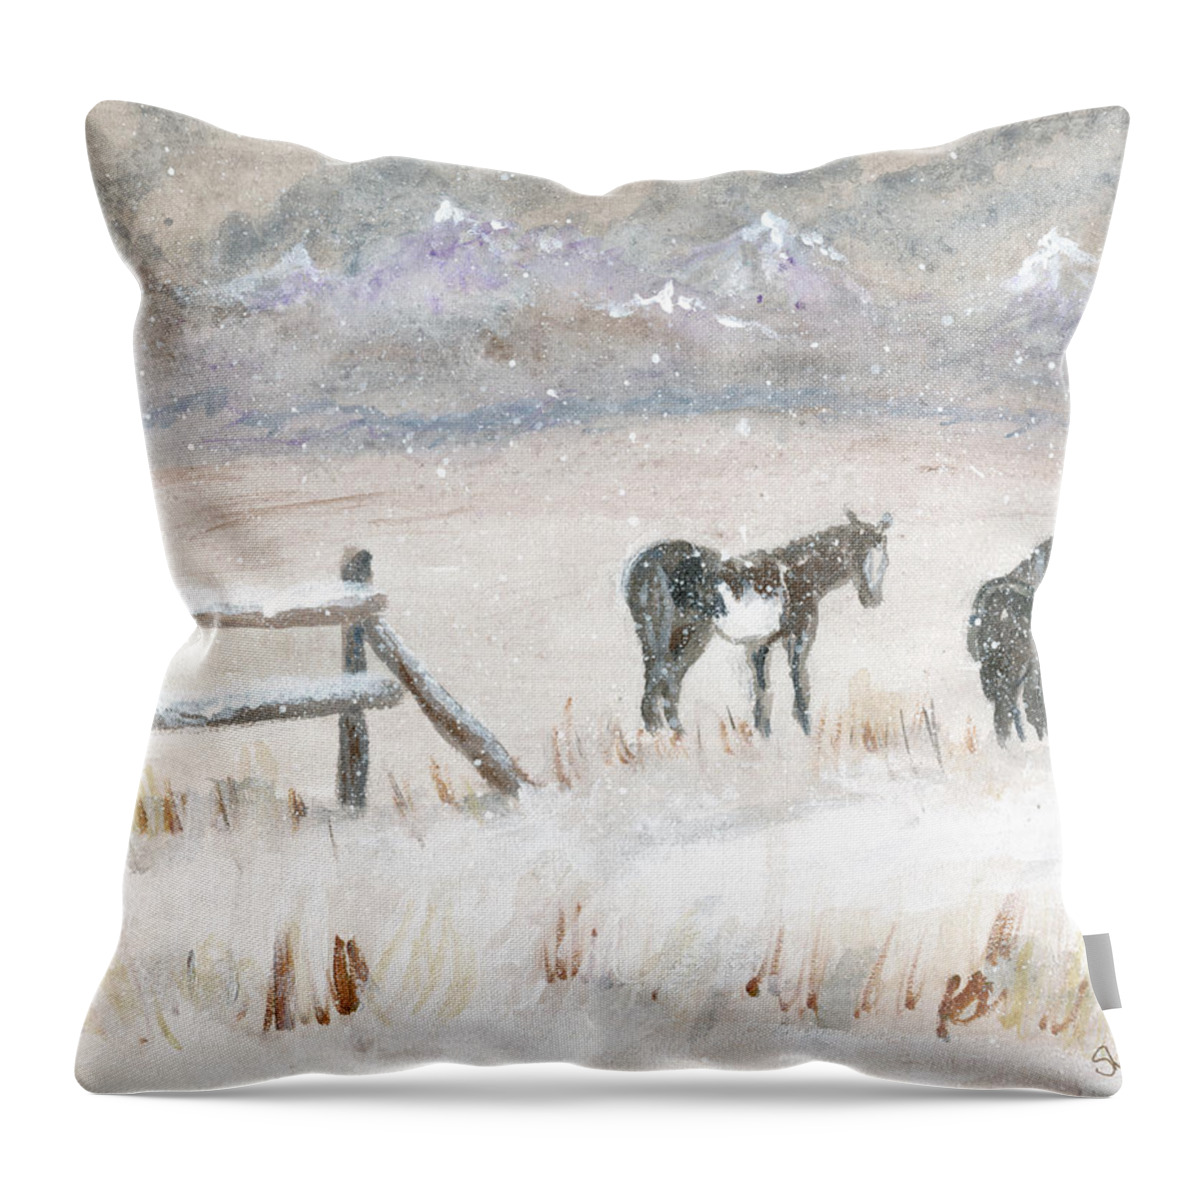 Horses Throw Pillow featuring the painting Horses in Snow by Sheila Johns